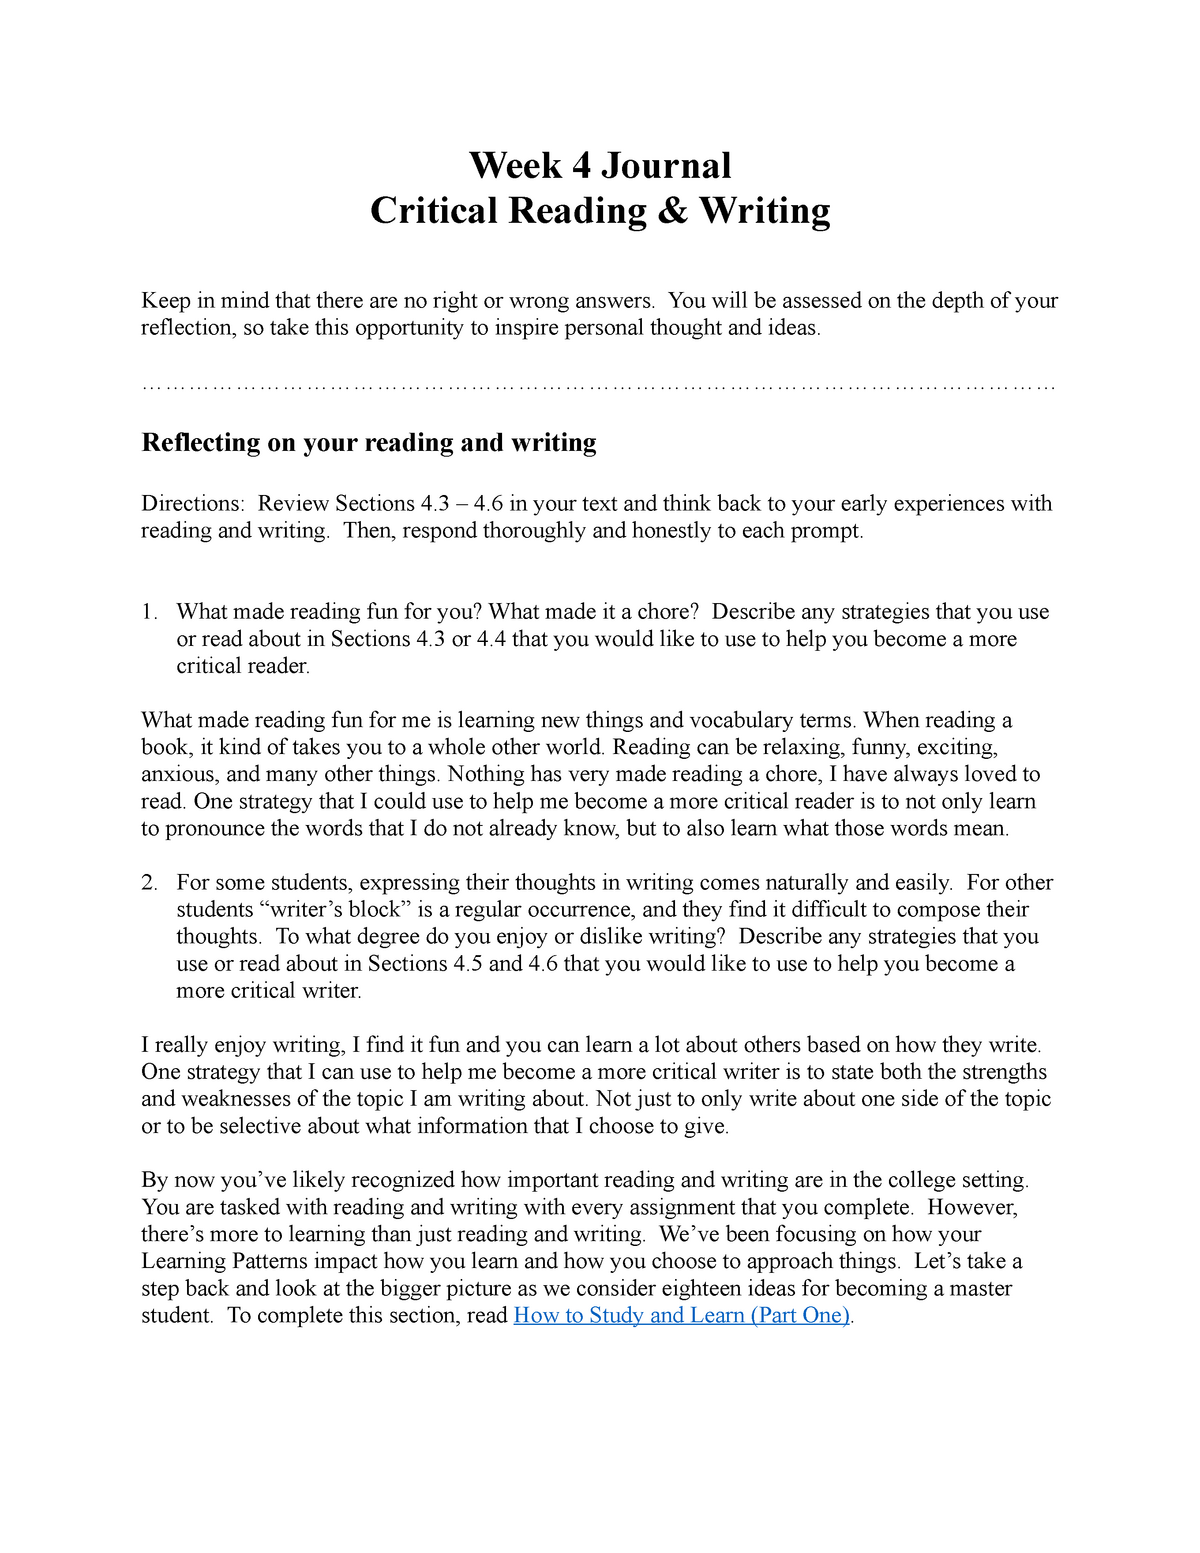 critical reading research paper